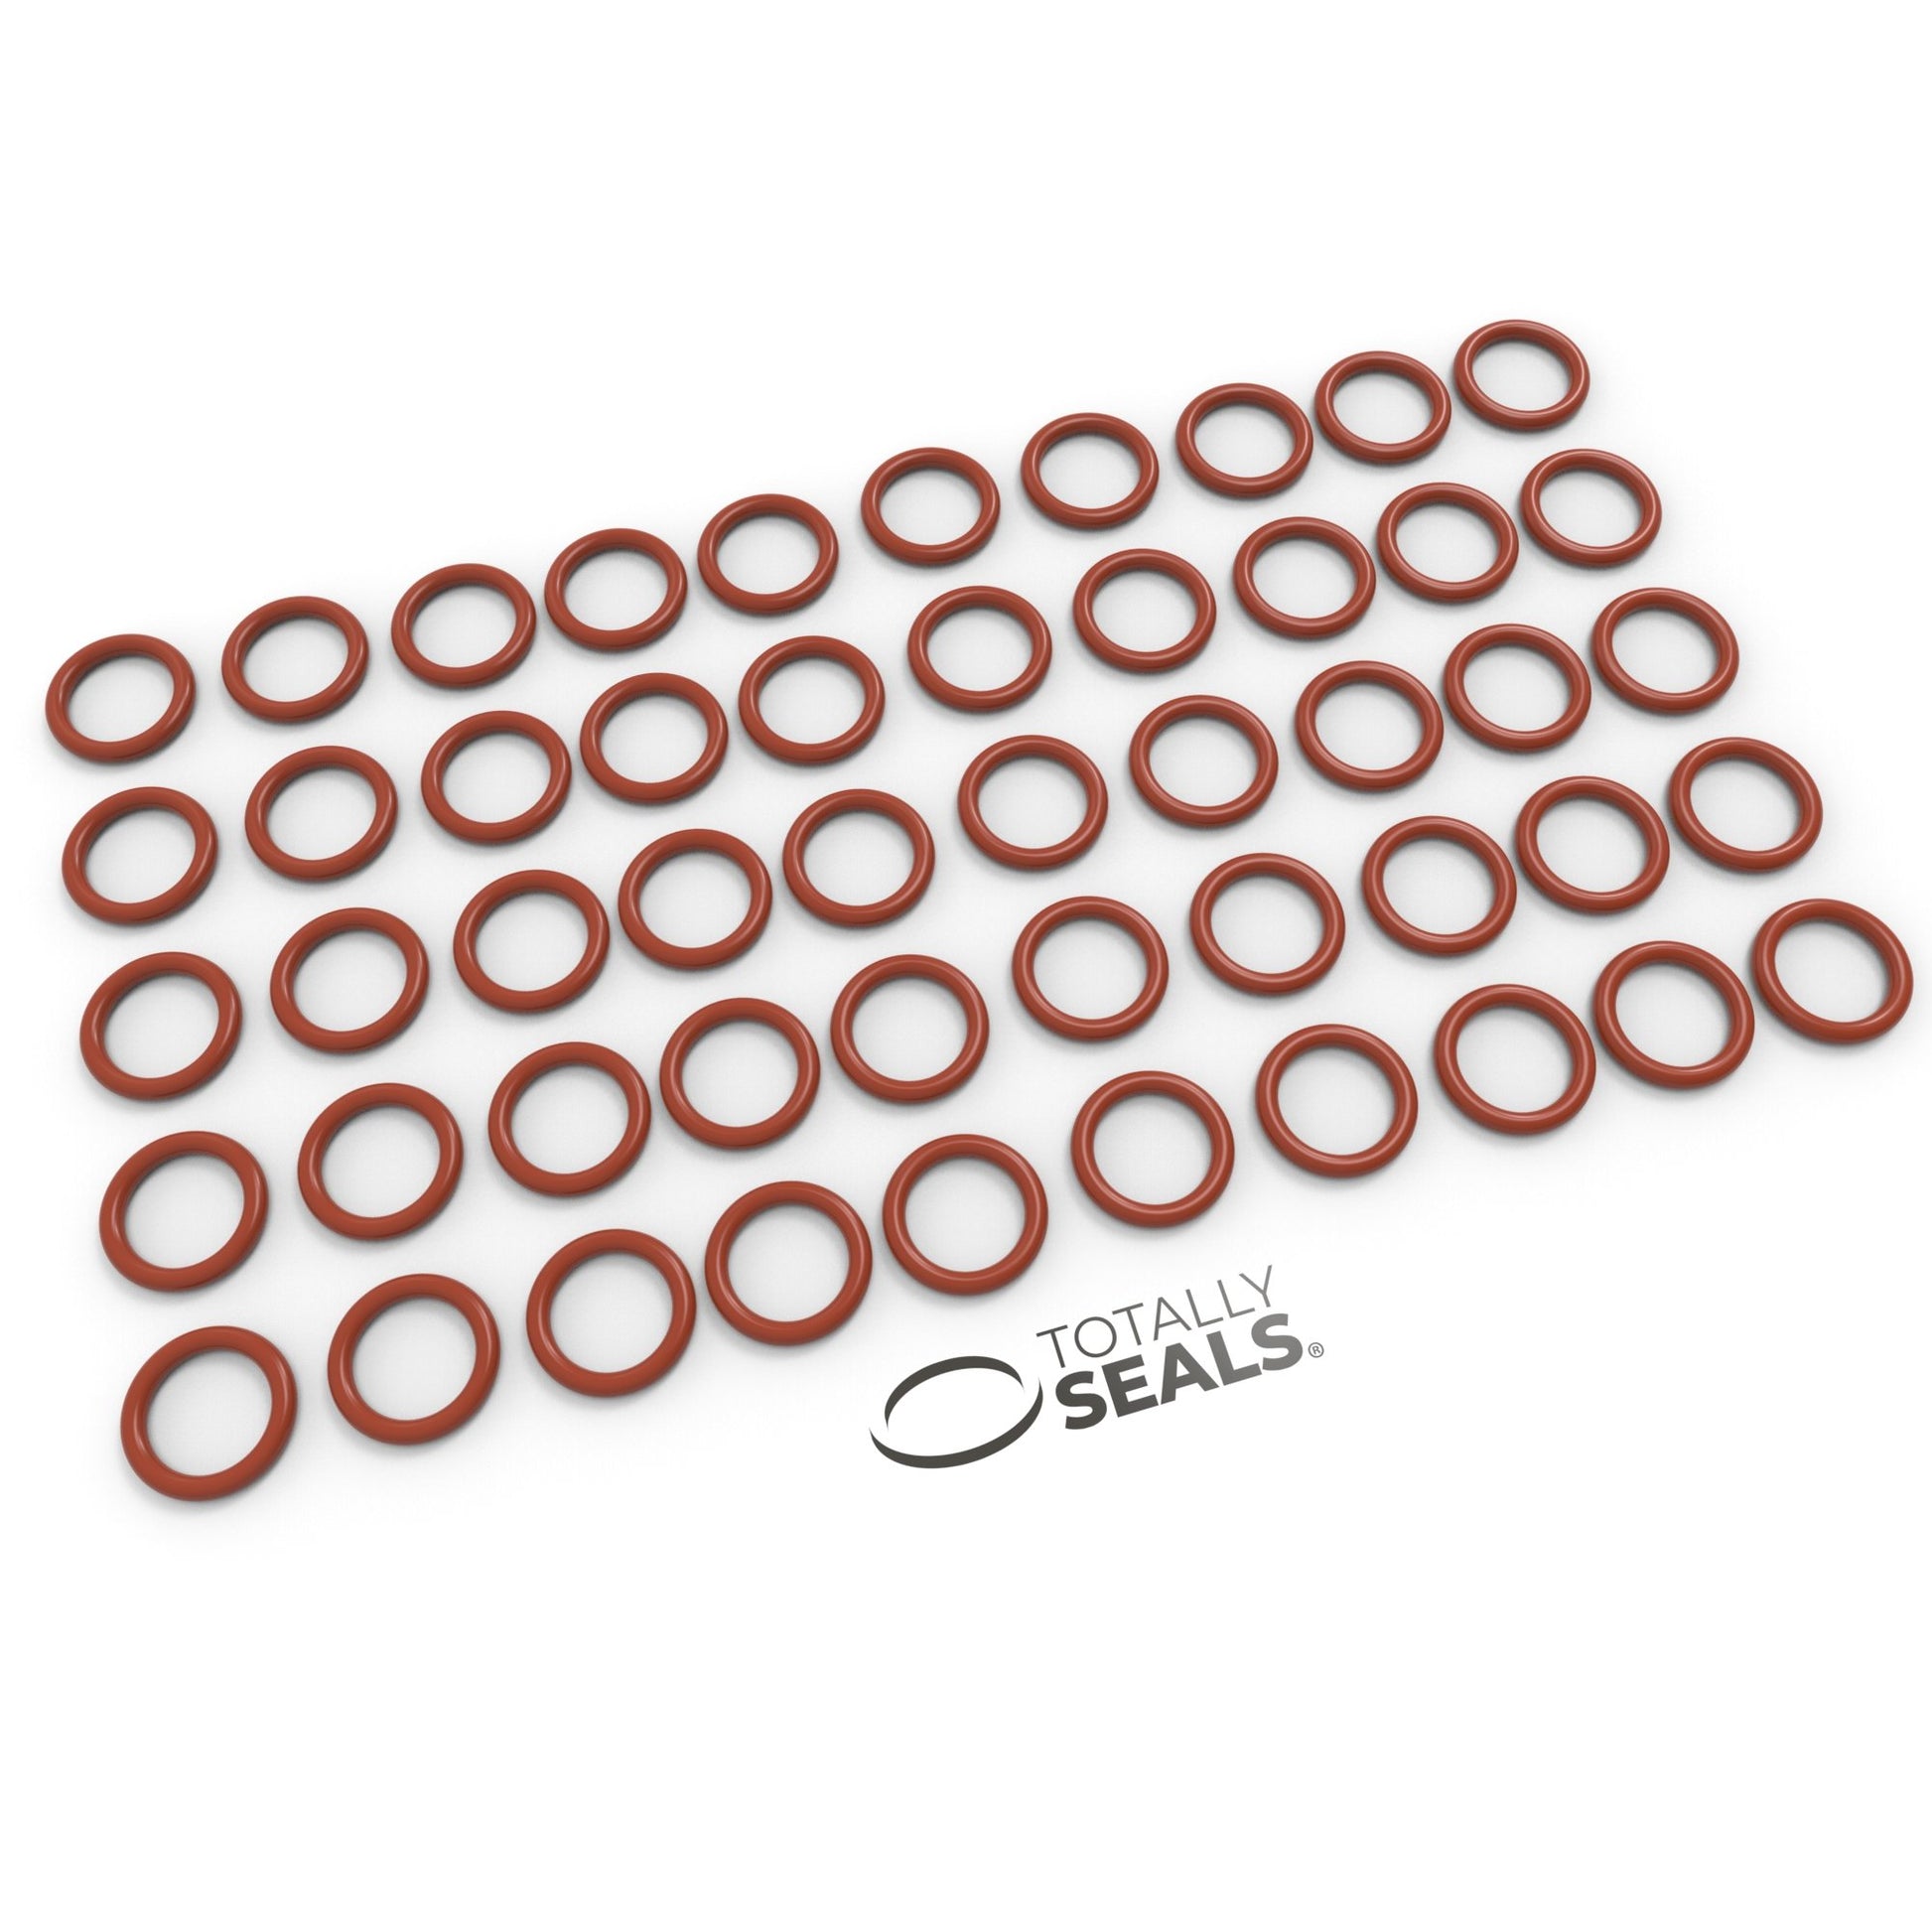 9mm x 3mm (15mm OD) Silicone O-Rings - Totally Seals®